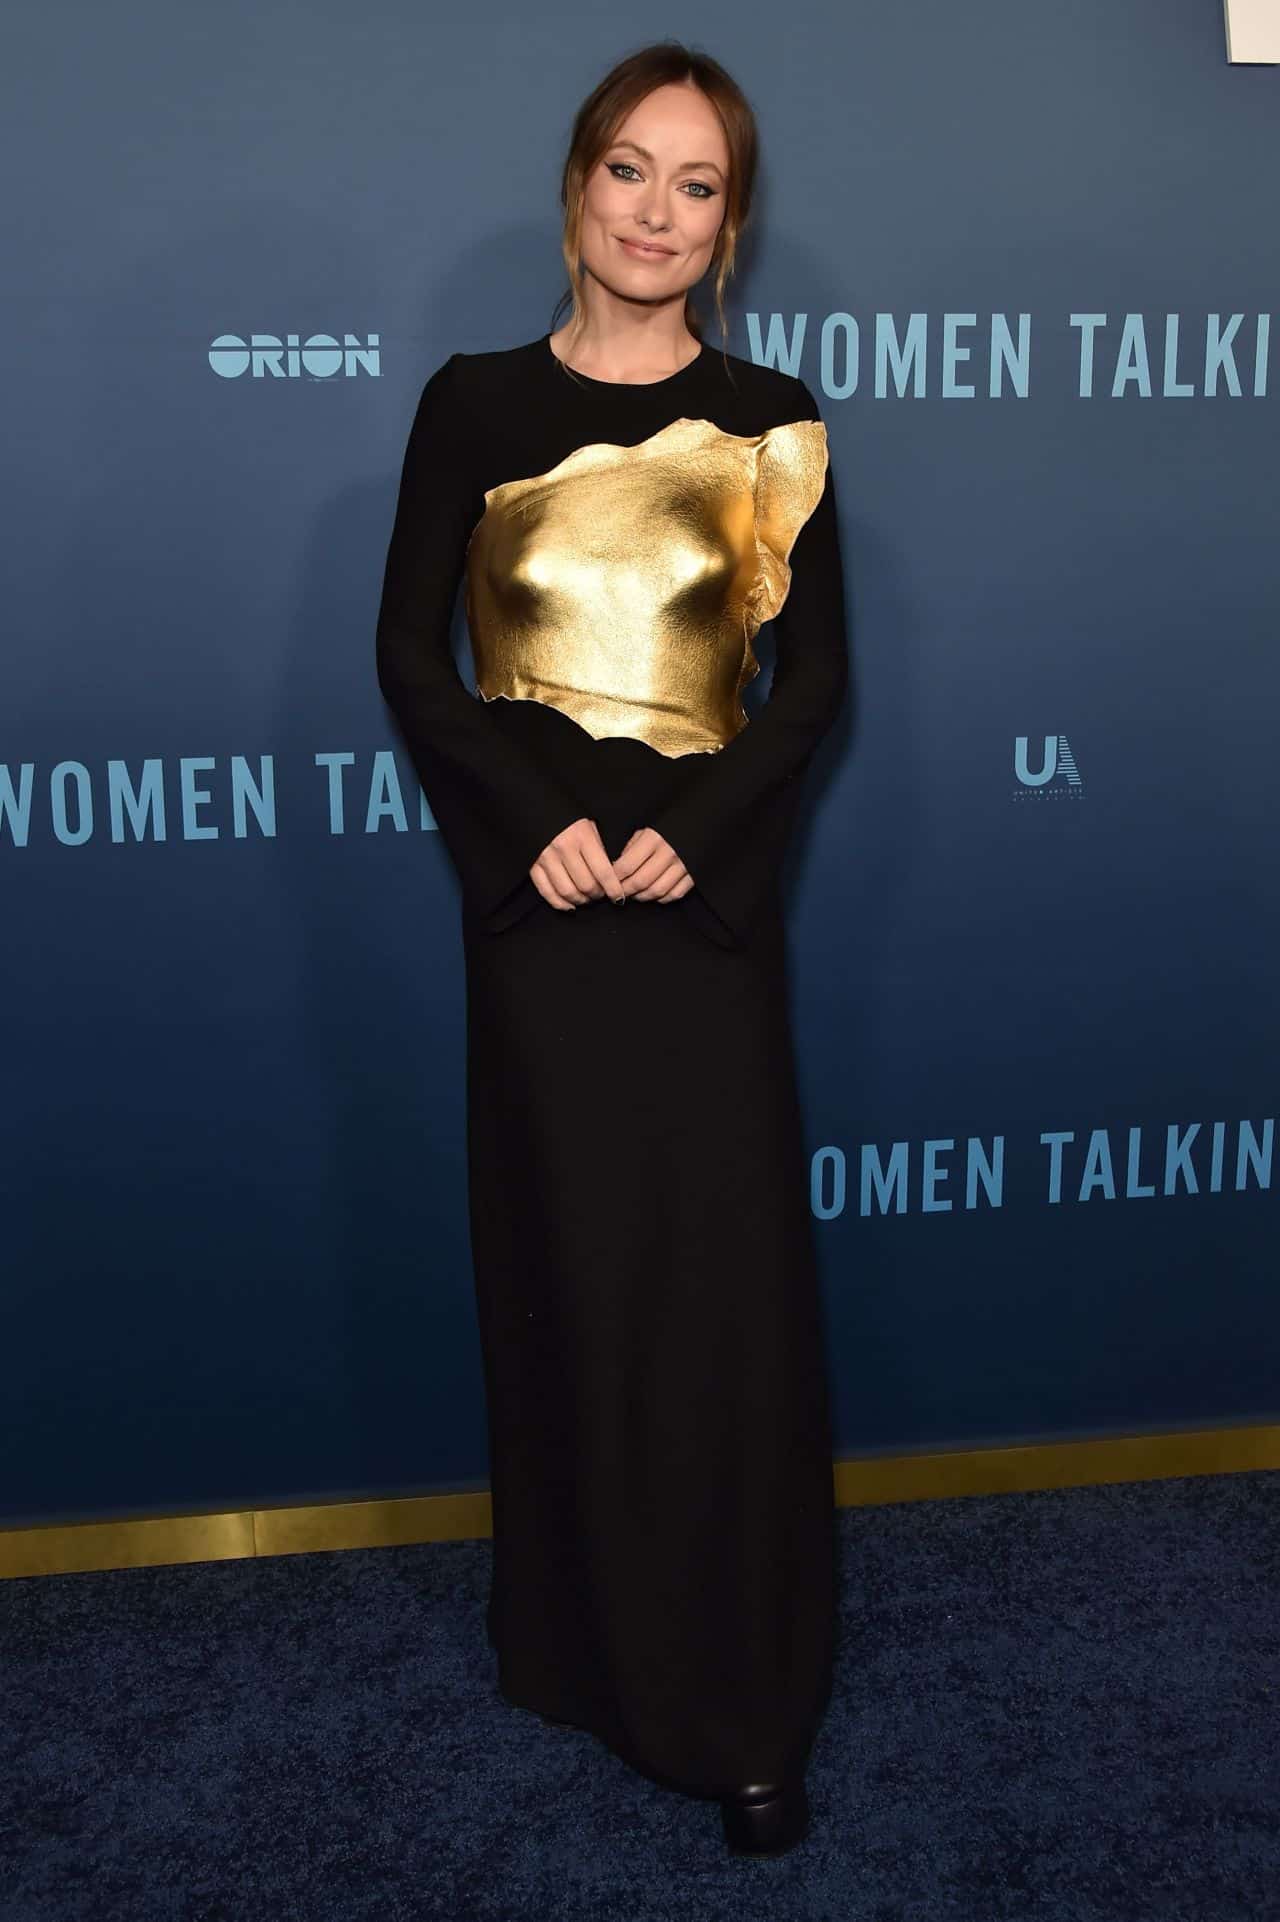 Olivia Wilde Wore a Gold Breastplate at the “Women Talking” Premiere in LA